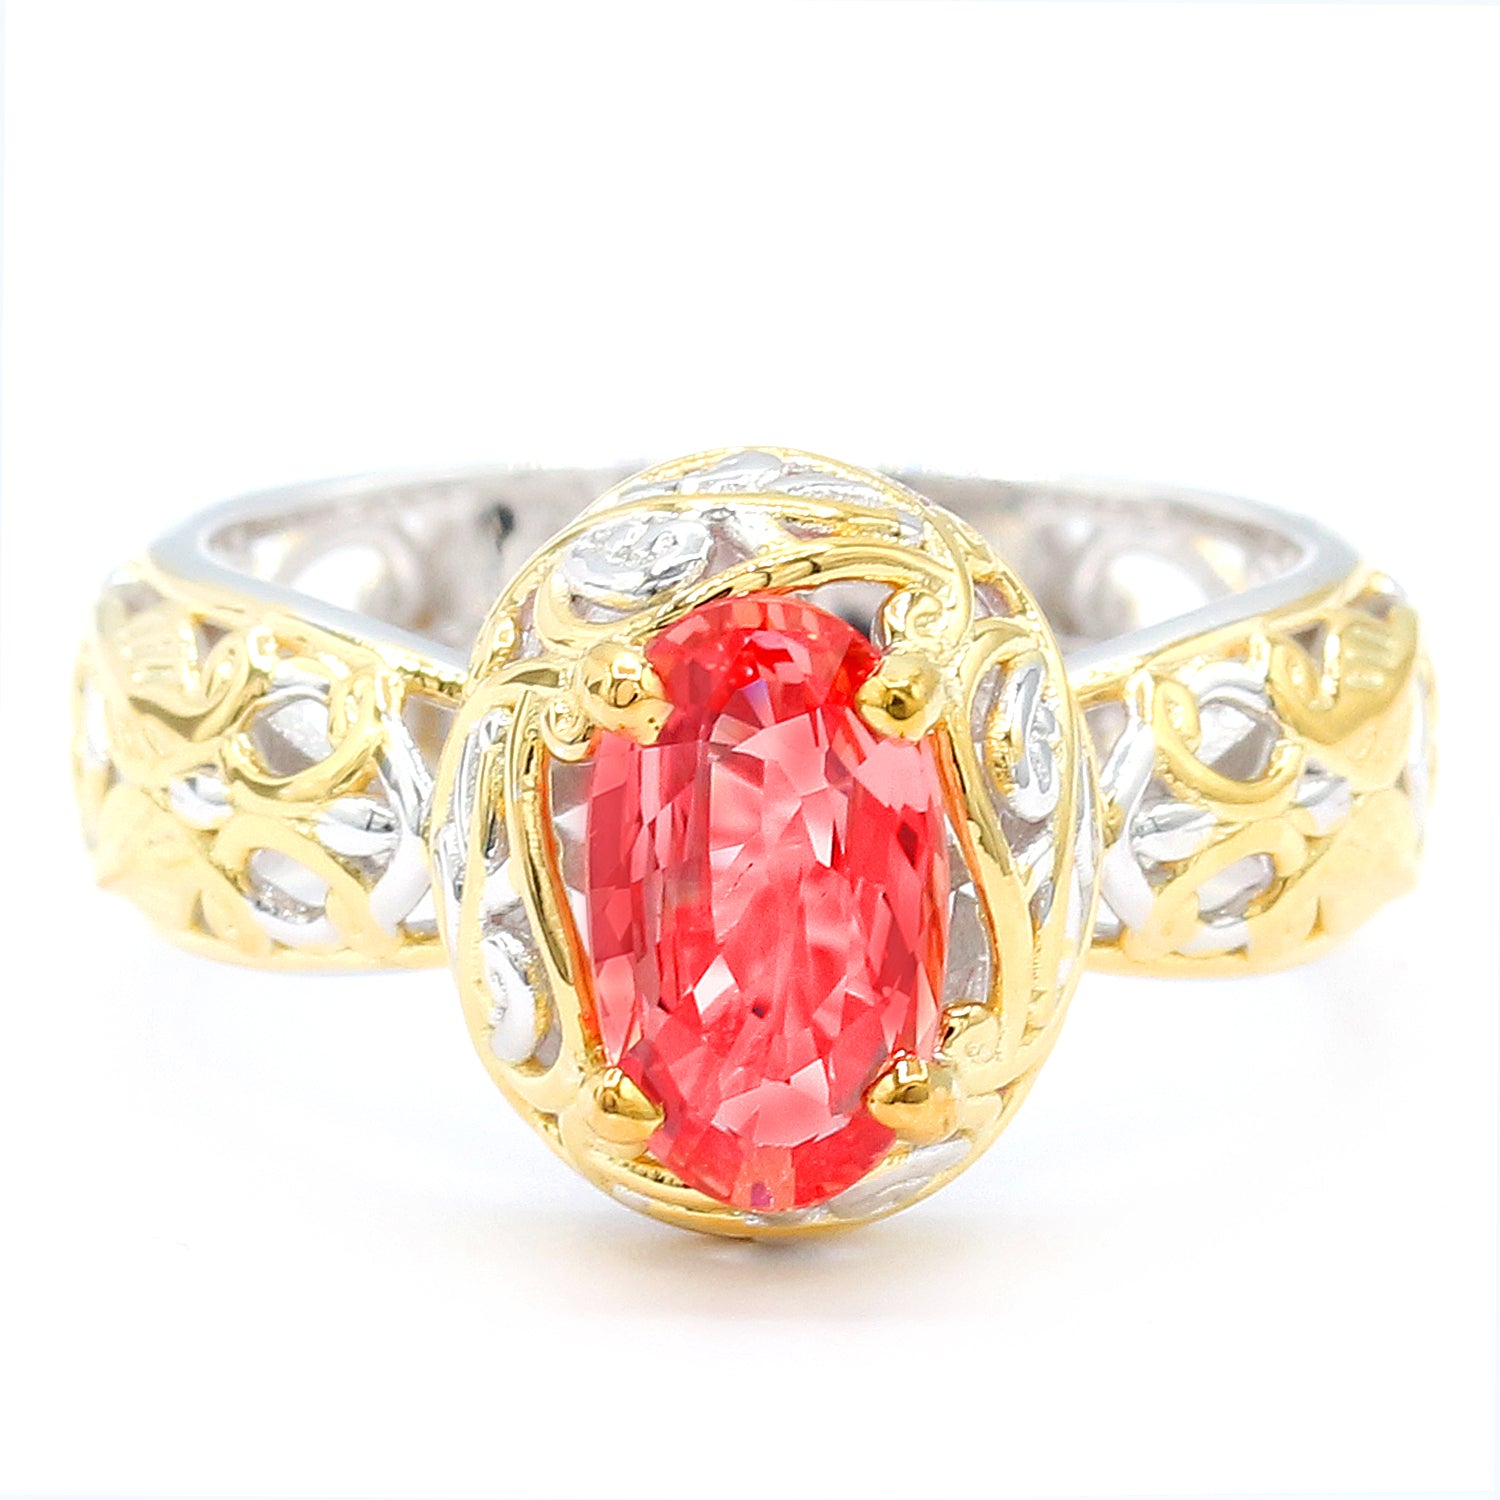 Limited Edition Gems en Vogue Luxe, One-of-a-Kind 1.47ctw Padparadscha Sapphire Ring